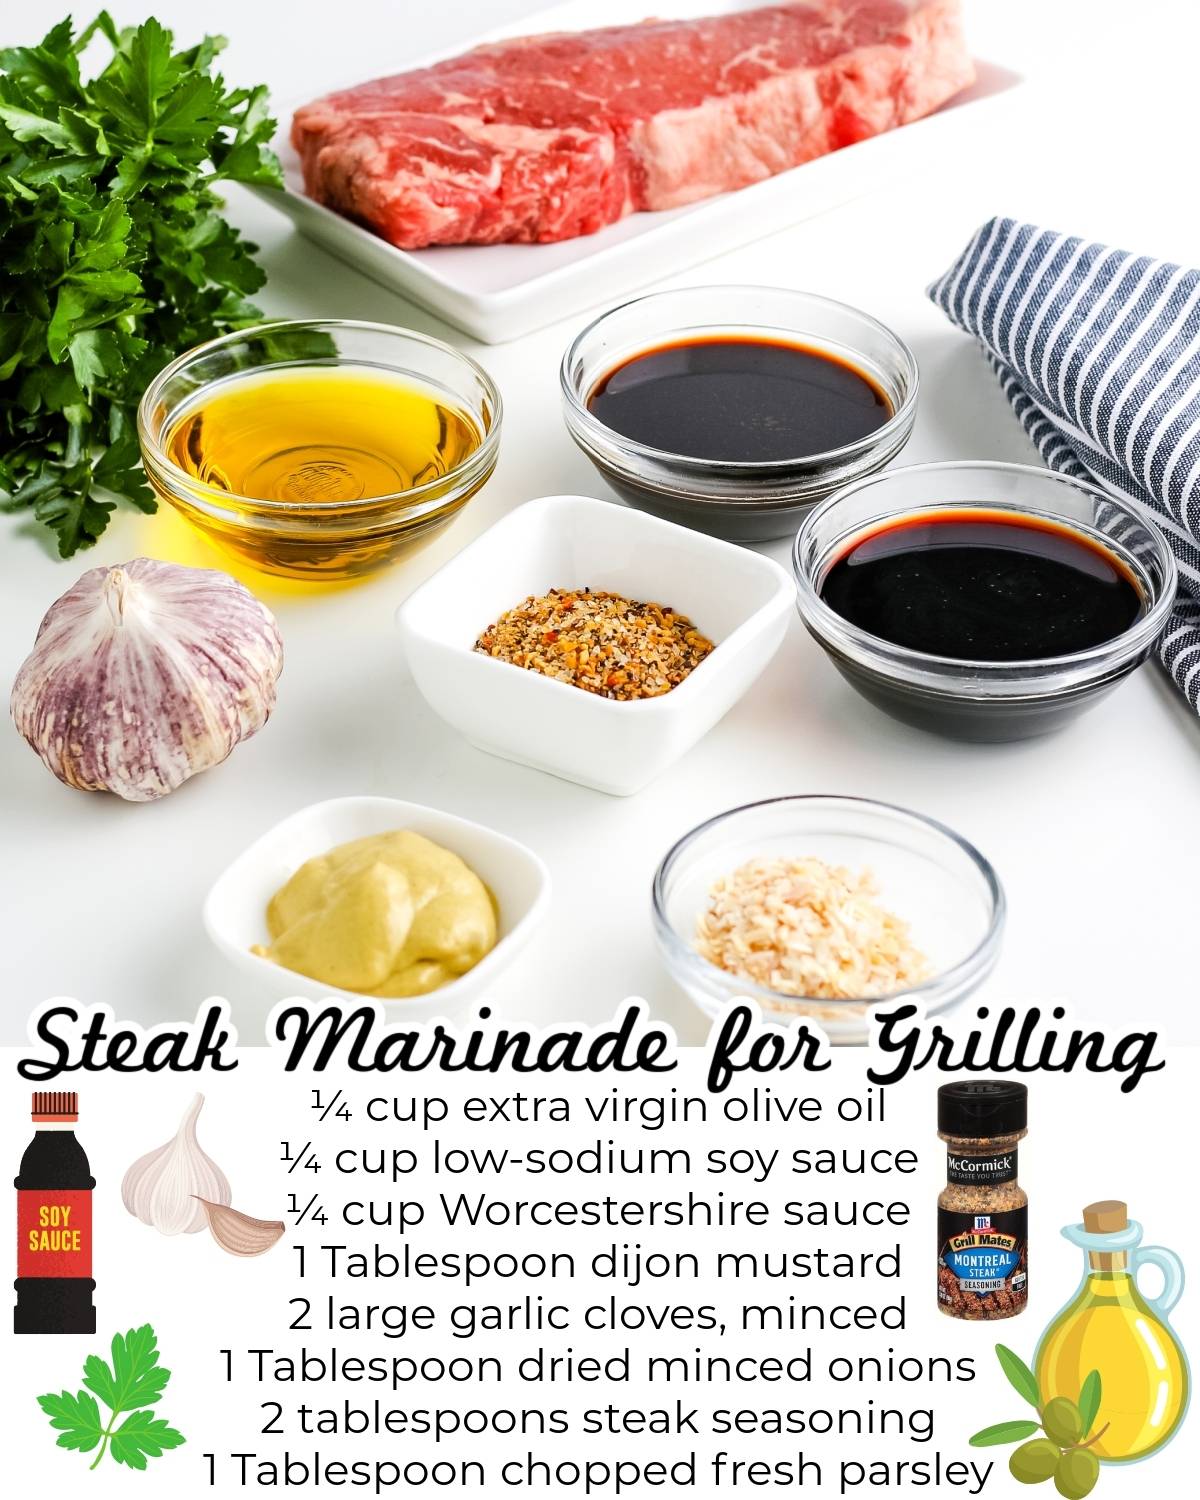 All of the ingredients needed to make this steak marinade recipe.